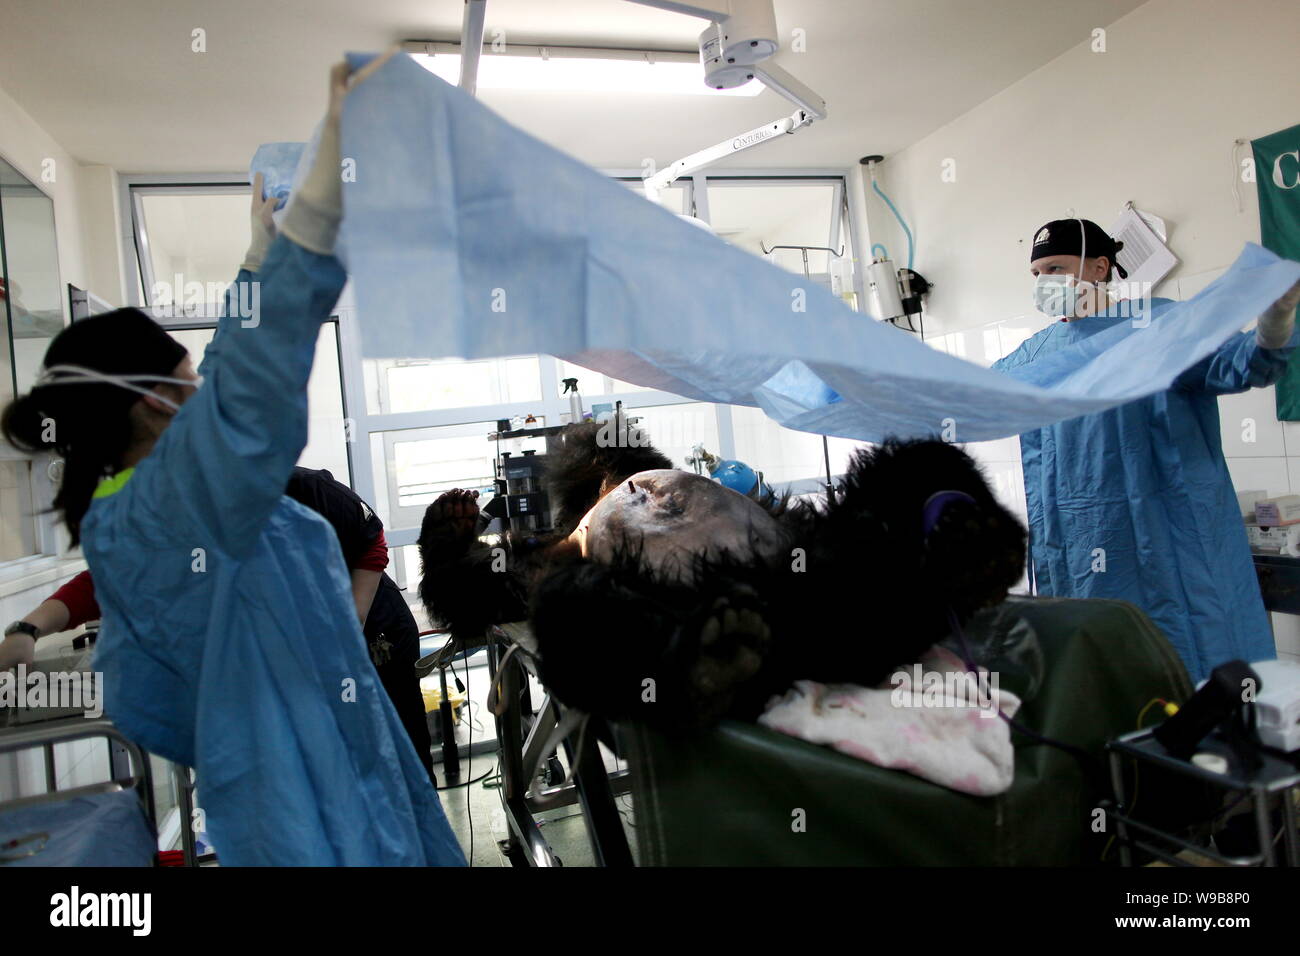 Staff from the Animals Asia Foundation prepare for an operate on the female bear Kylie to remove two tumours from her body at a bear rescue center in Stock Photo